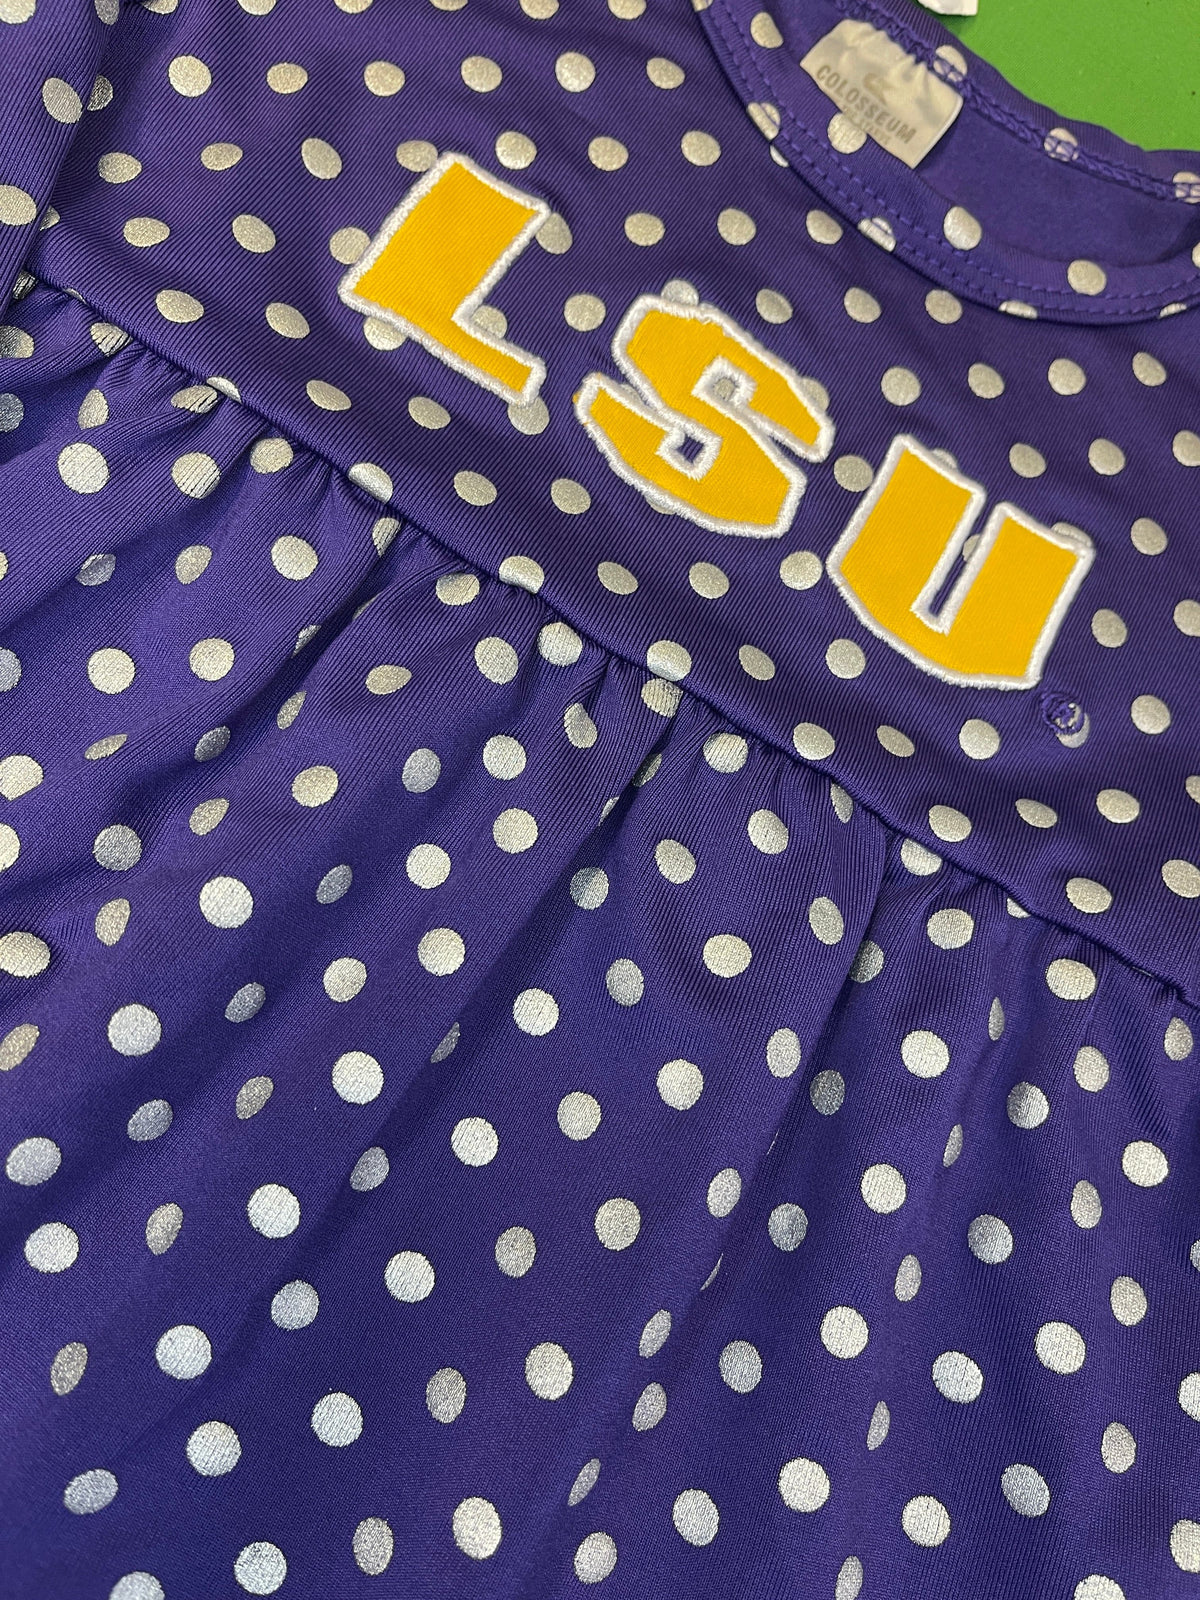 NCAA Louisiana State LSU Tigers Purple Dotted Dress Infant Baby 6-12 Months